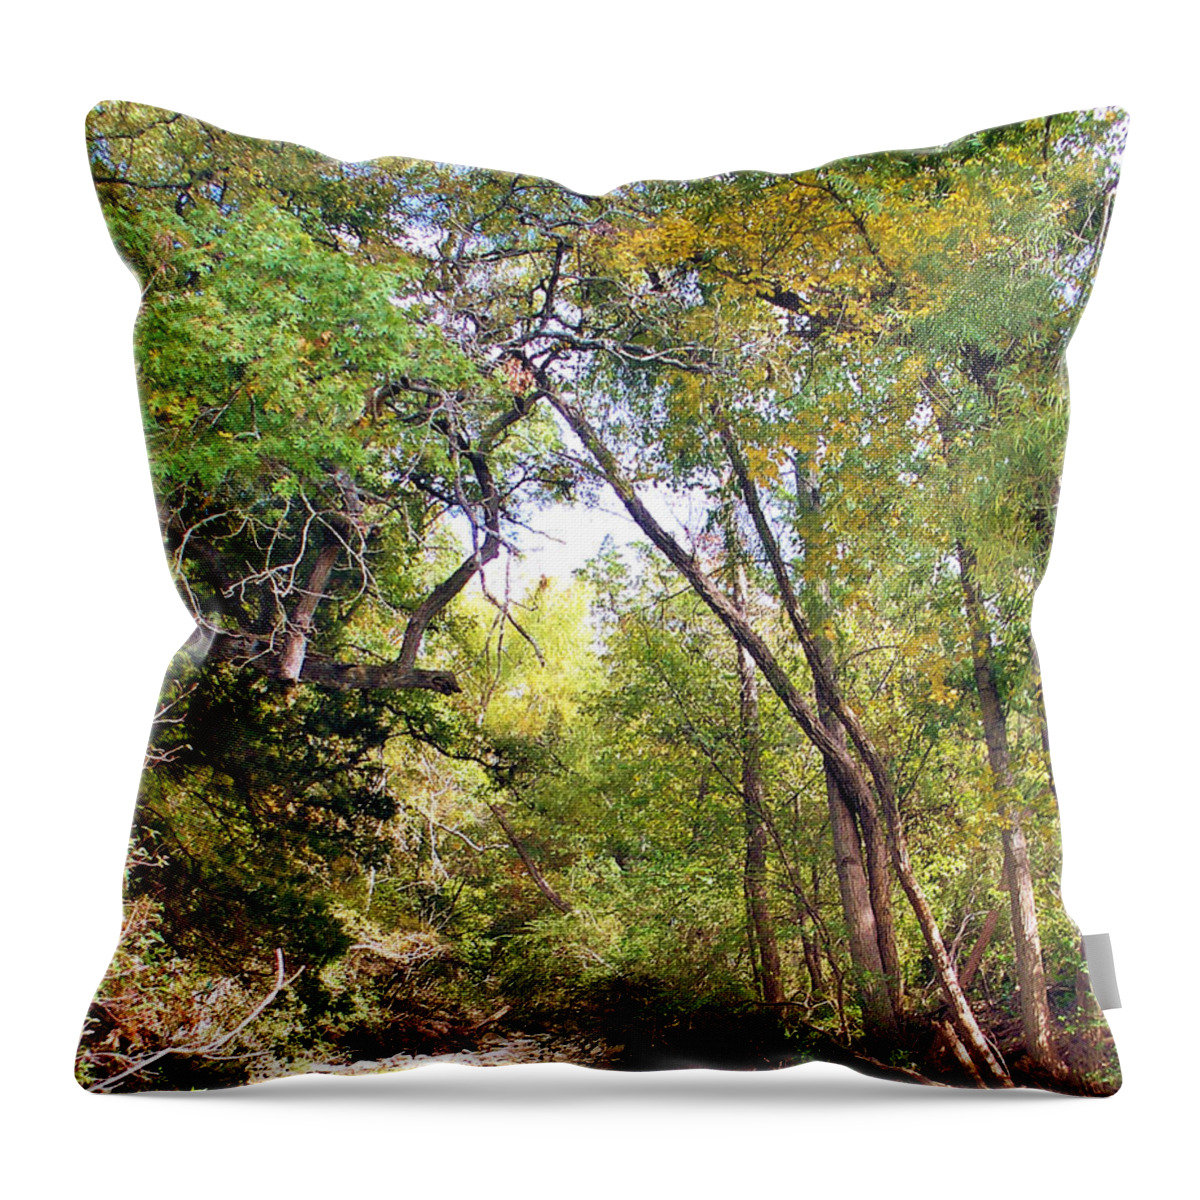 Walnut Creek Throw Pillow featuring the painting Walnut Creek by Troy Caperton